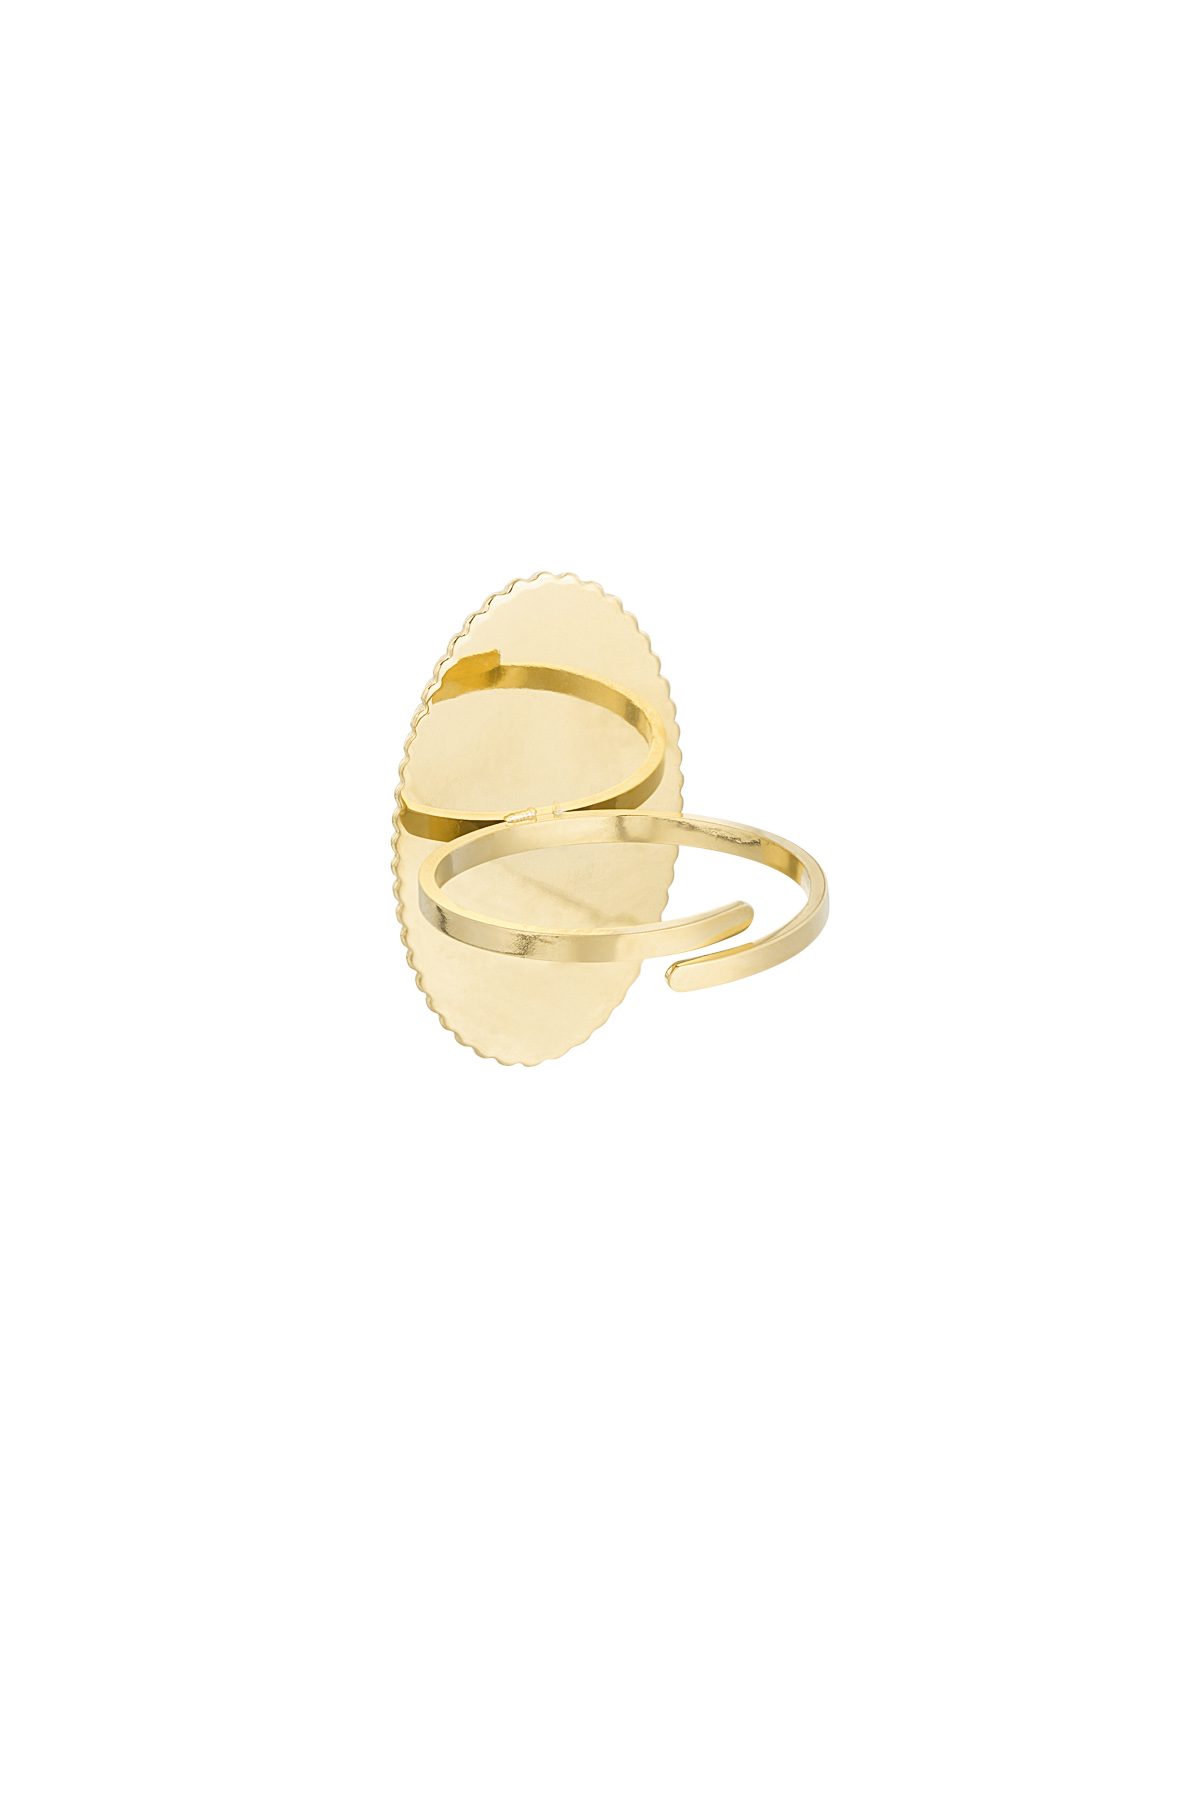 Ring vintage edge - gold/white h5 Picture5